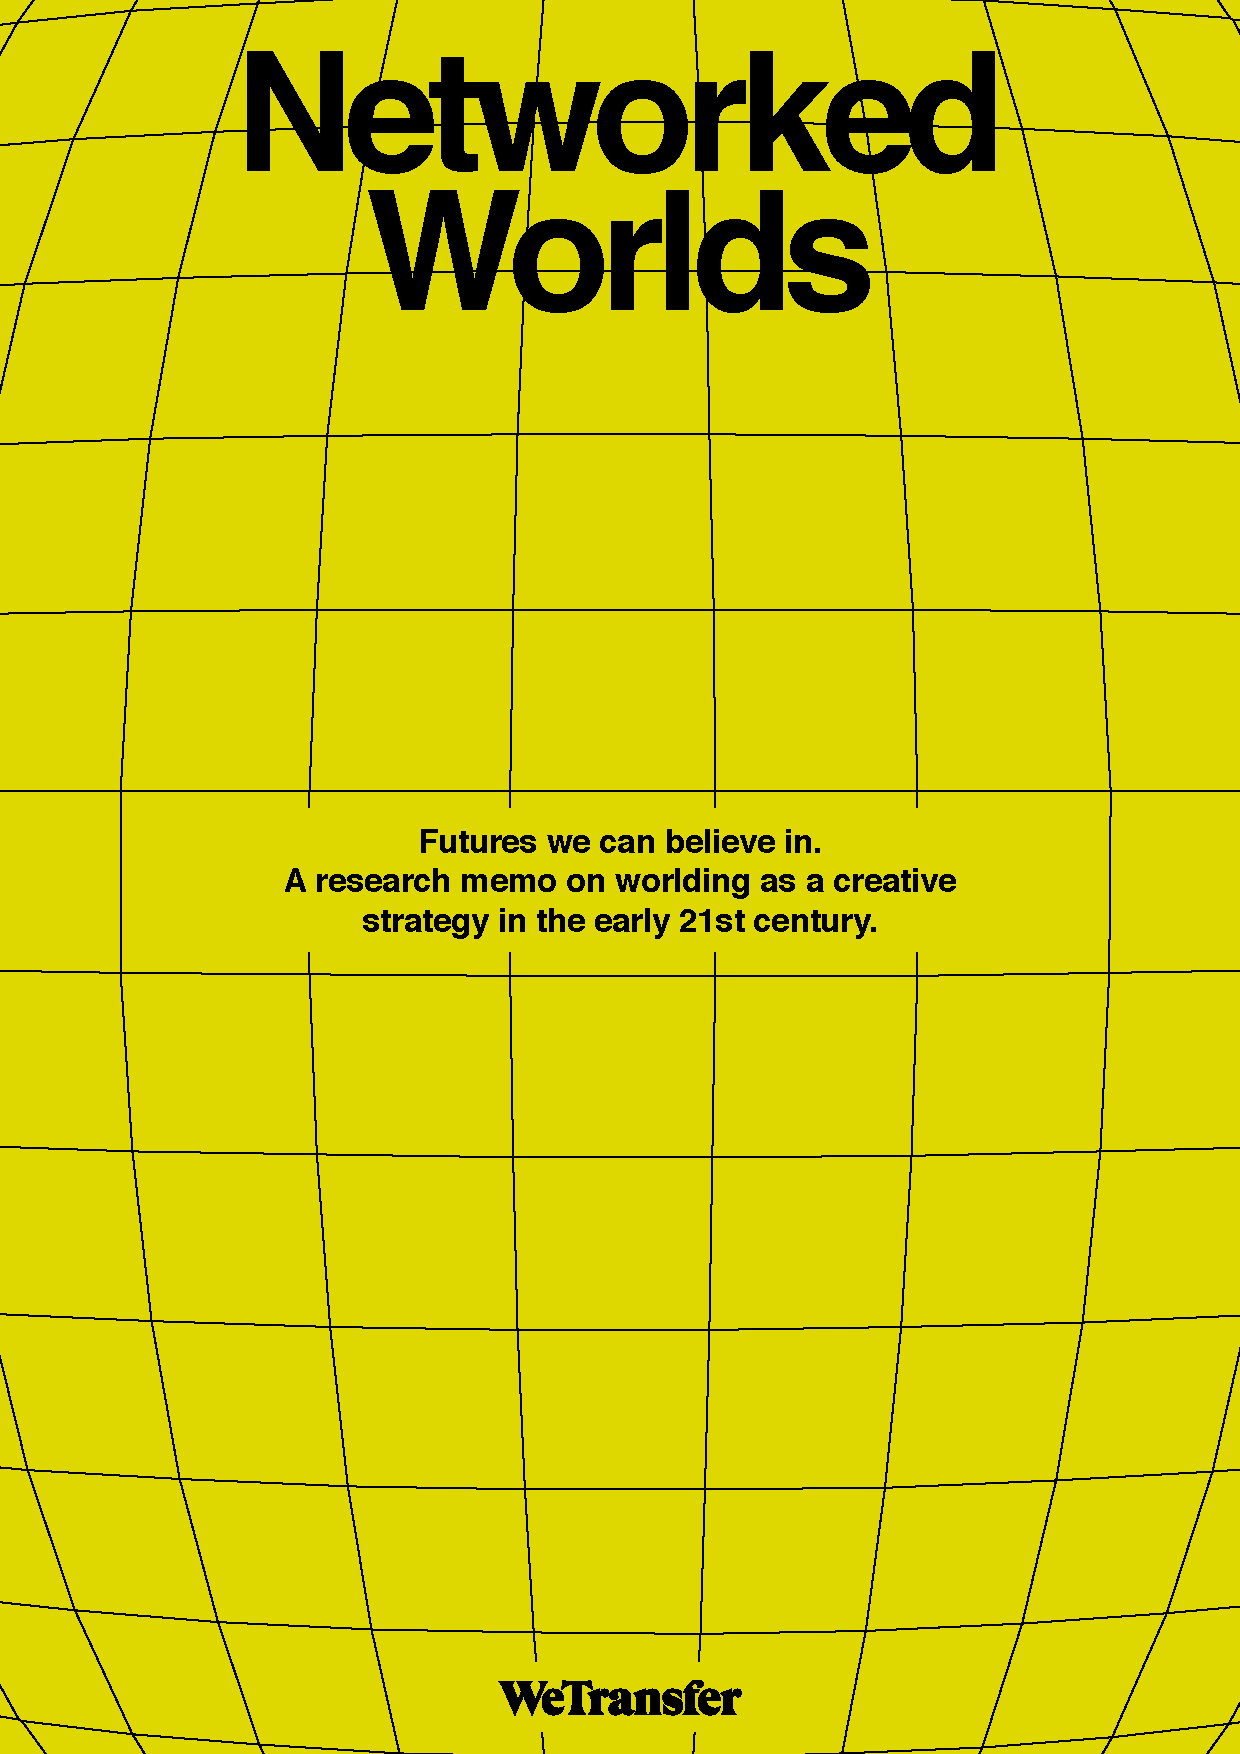 Final memo in Networked Culture trilogy explores ‘worlding’ as a creative strategy in the 21st century